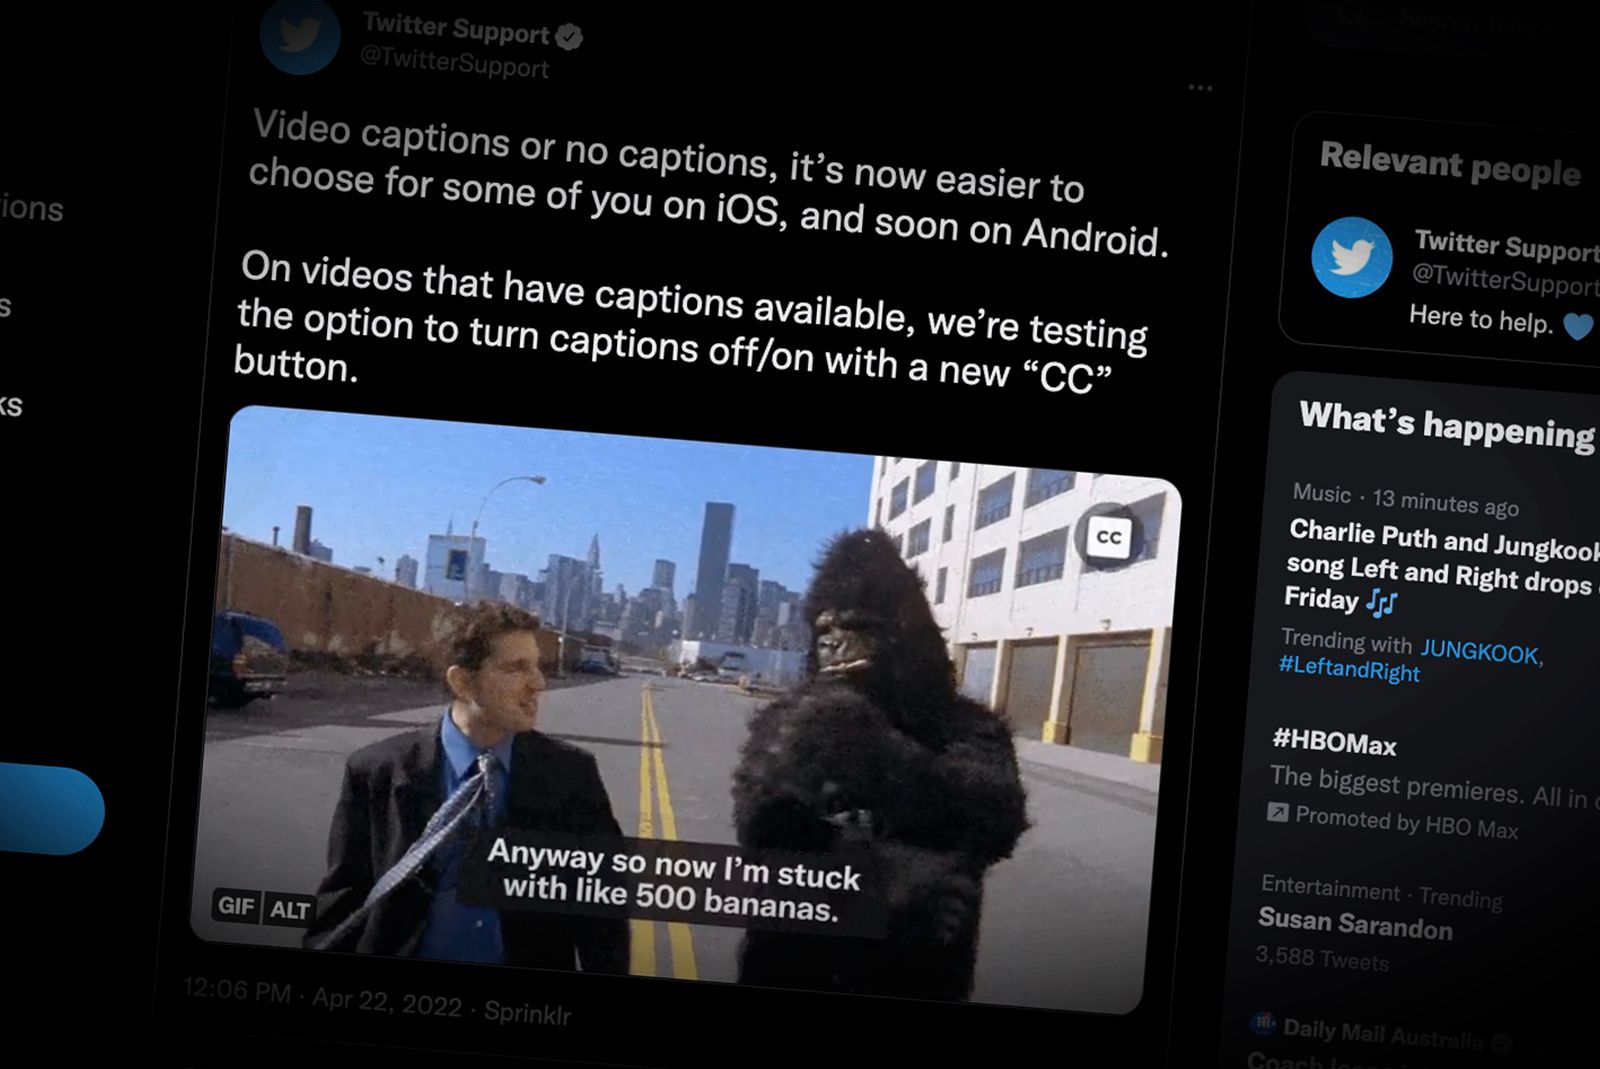 How to turn on captions on a video on Twitter photo 1